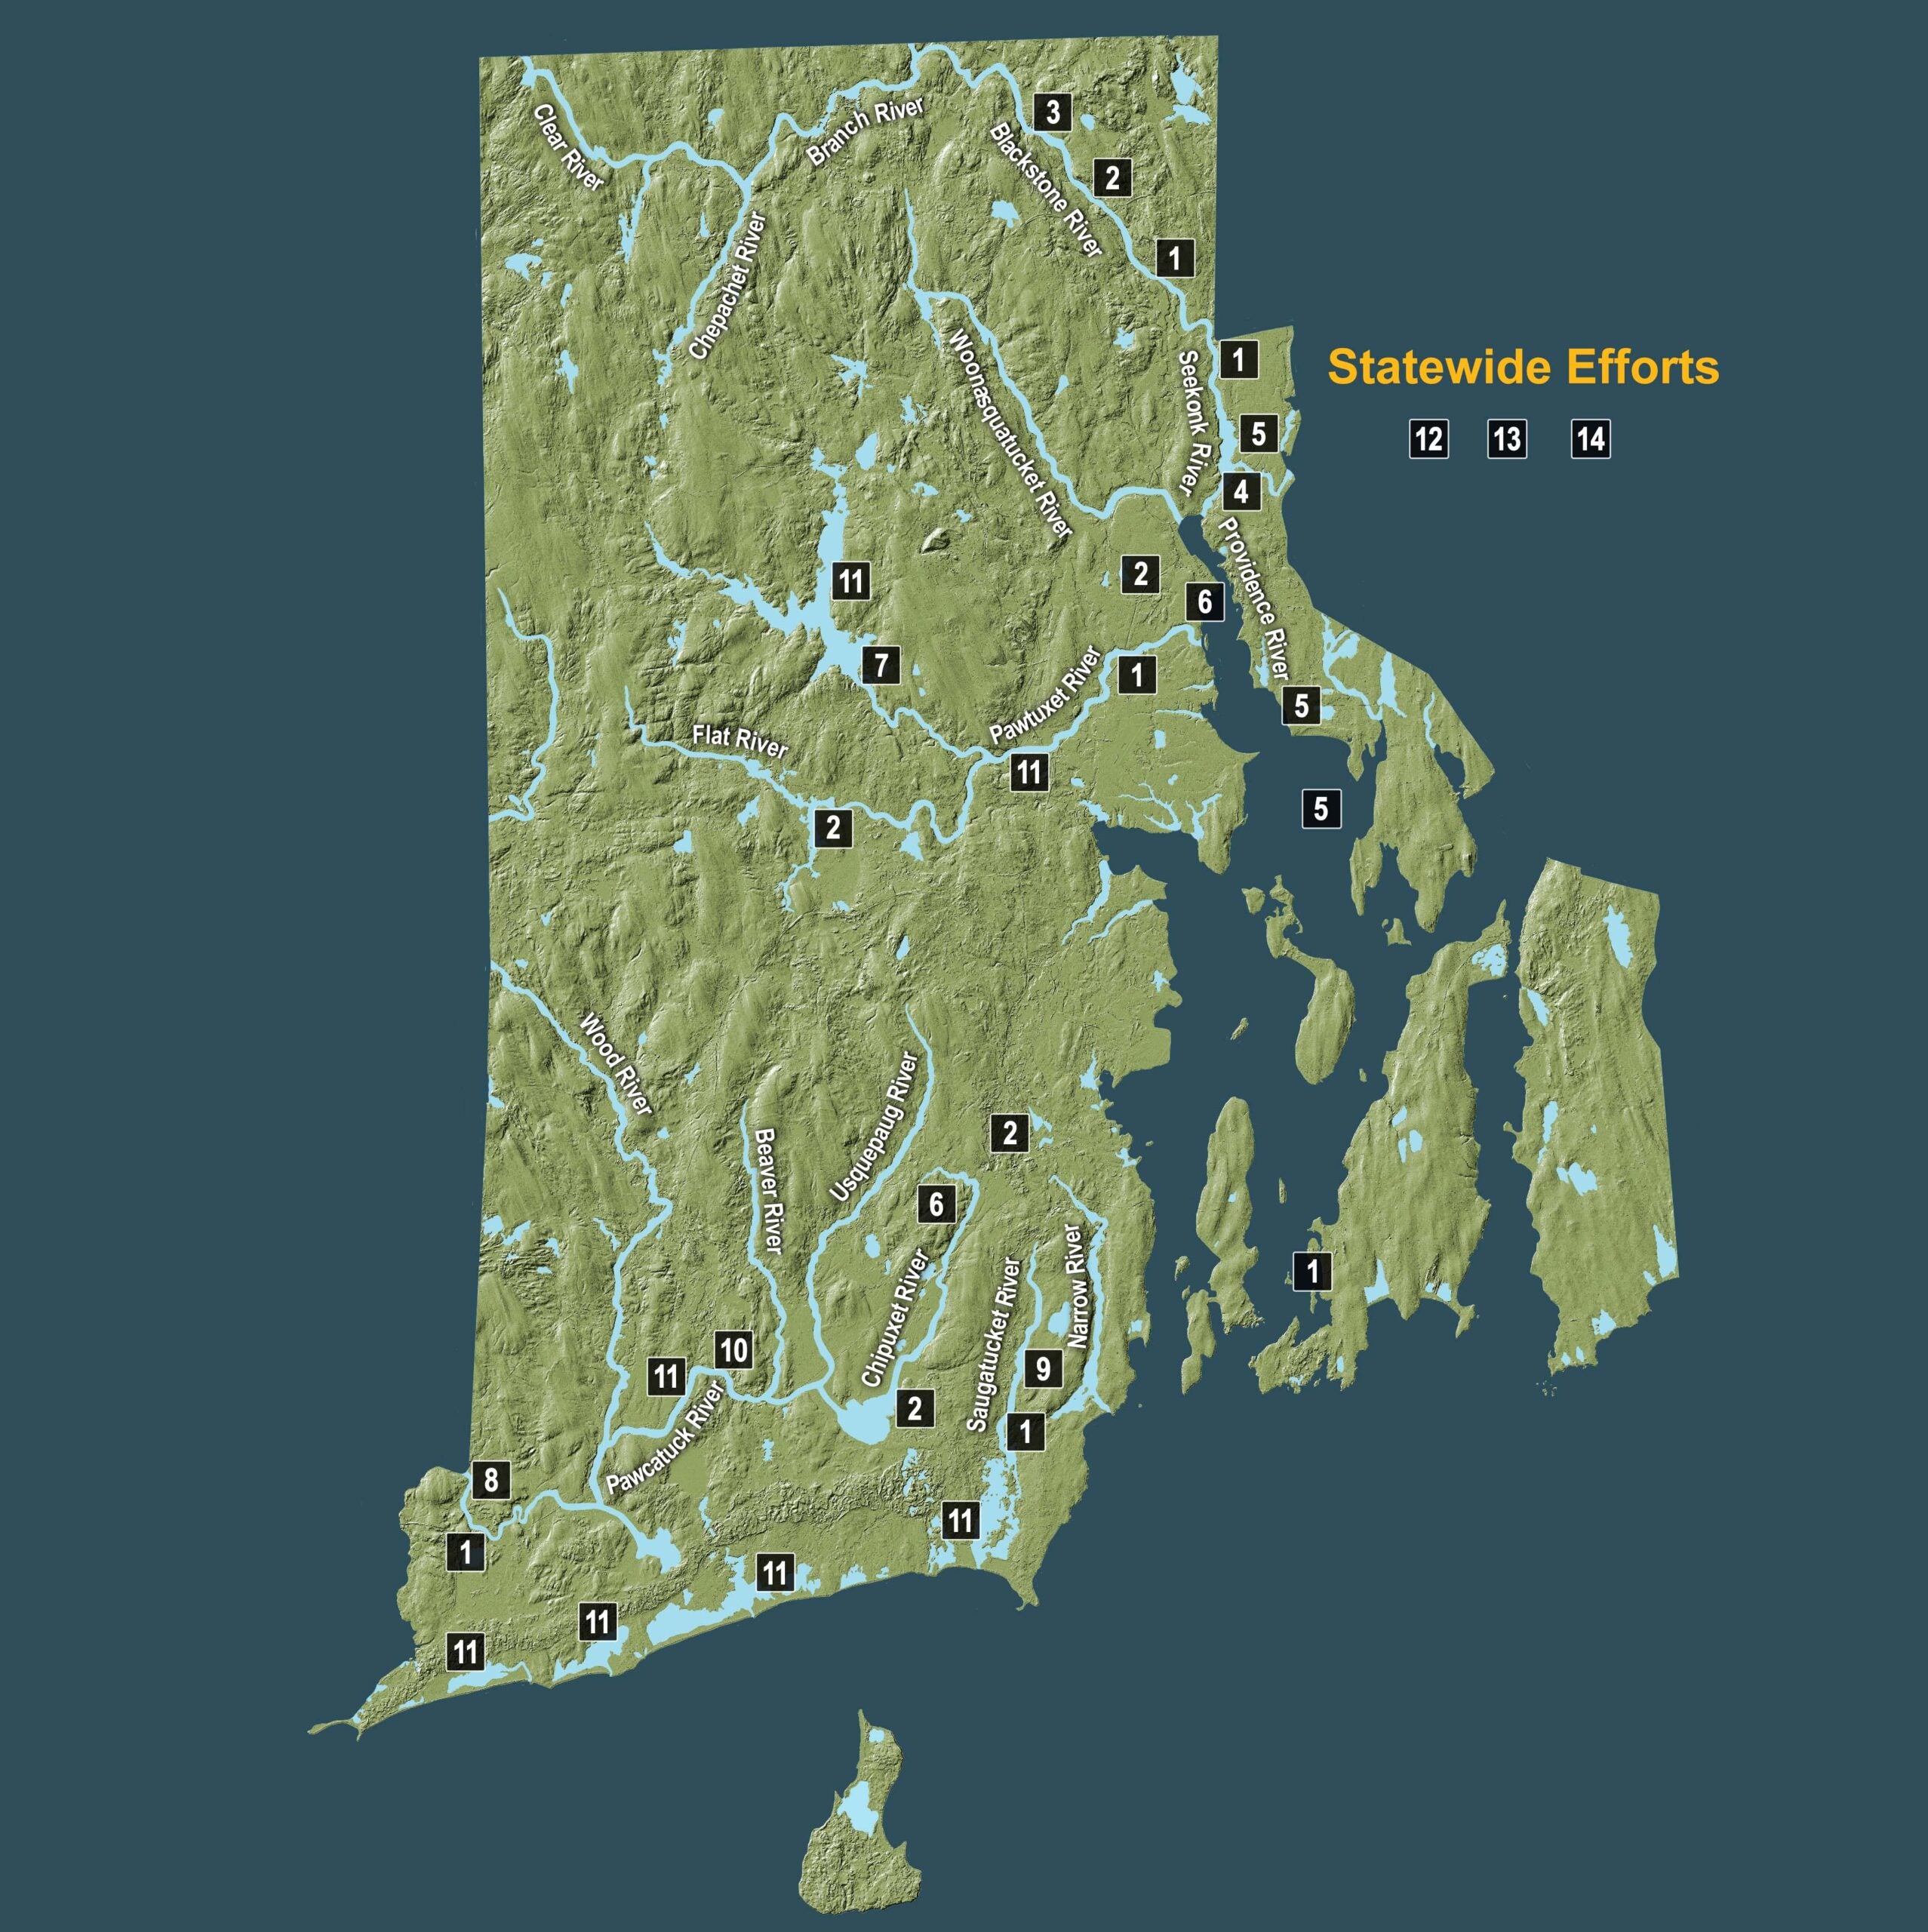 vector map of Rhode Island with the state's rivers named